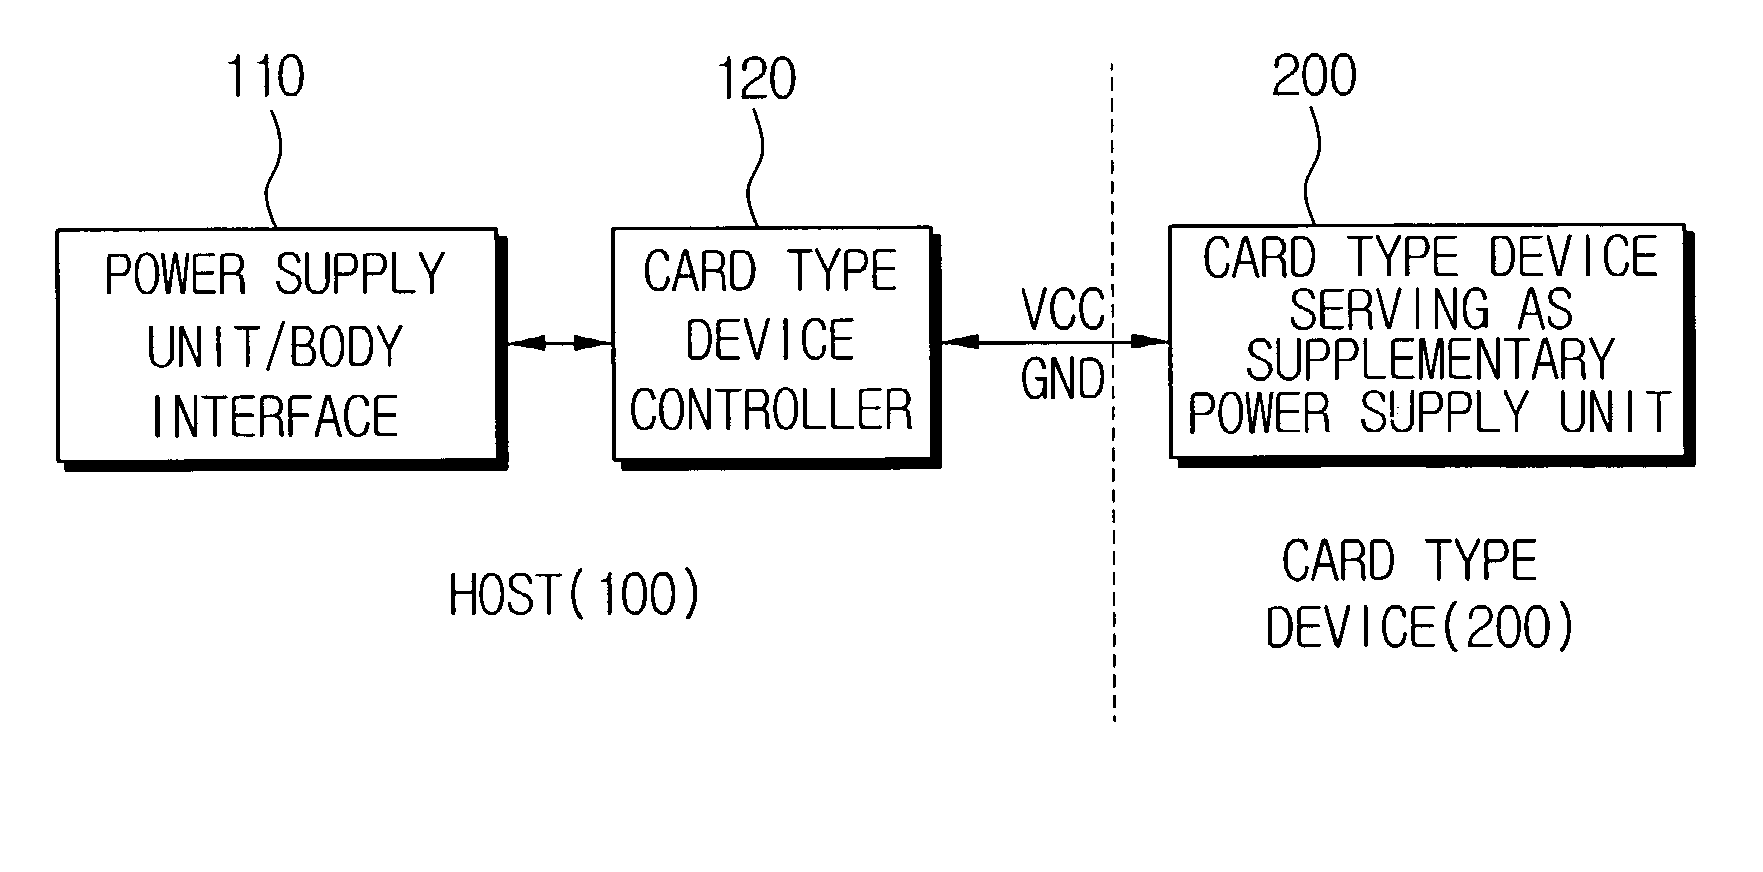 Card type device serving as supplementary battery and host using the same